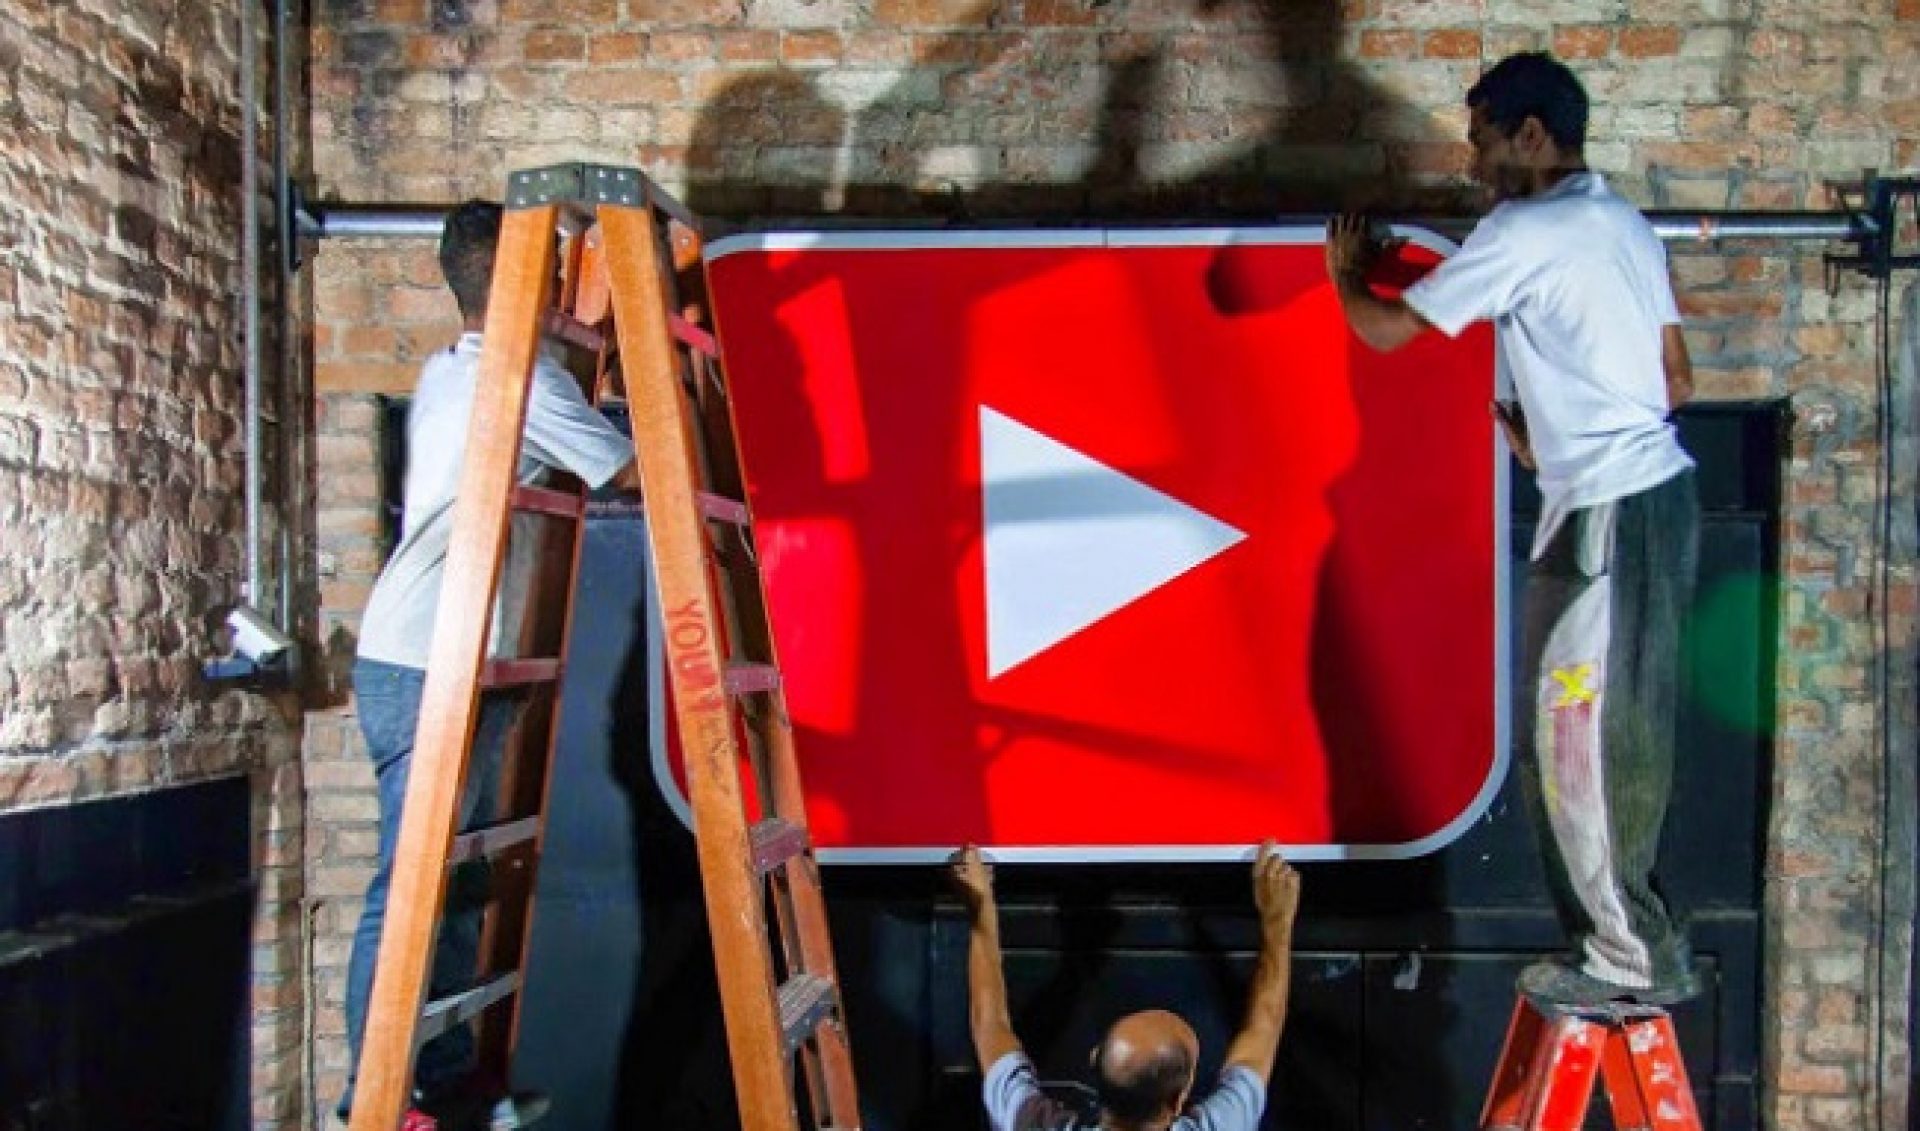 YouTube To Open New Space In São Paulo, Brazil With Instituto Criar